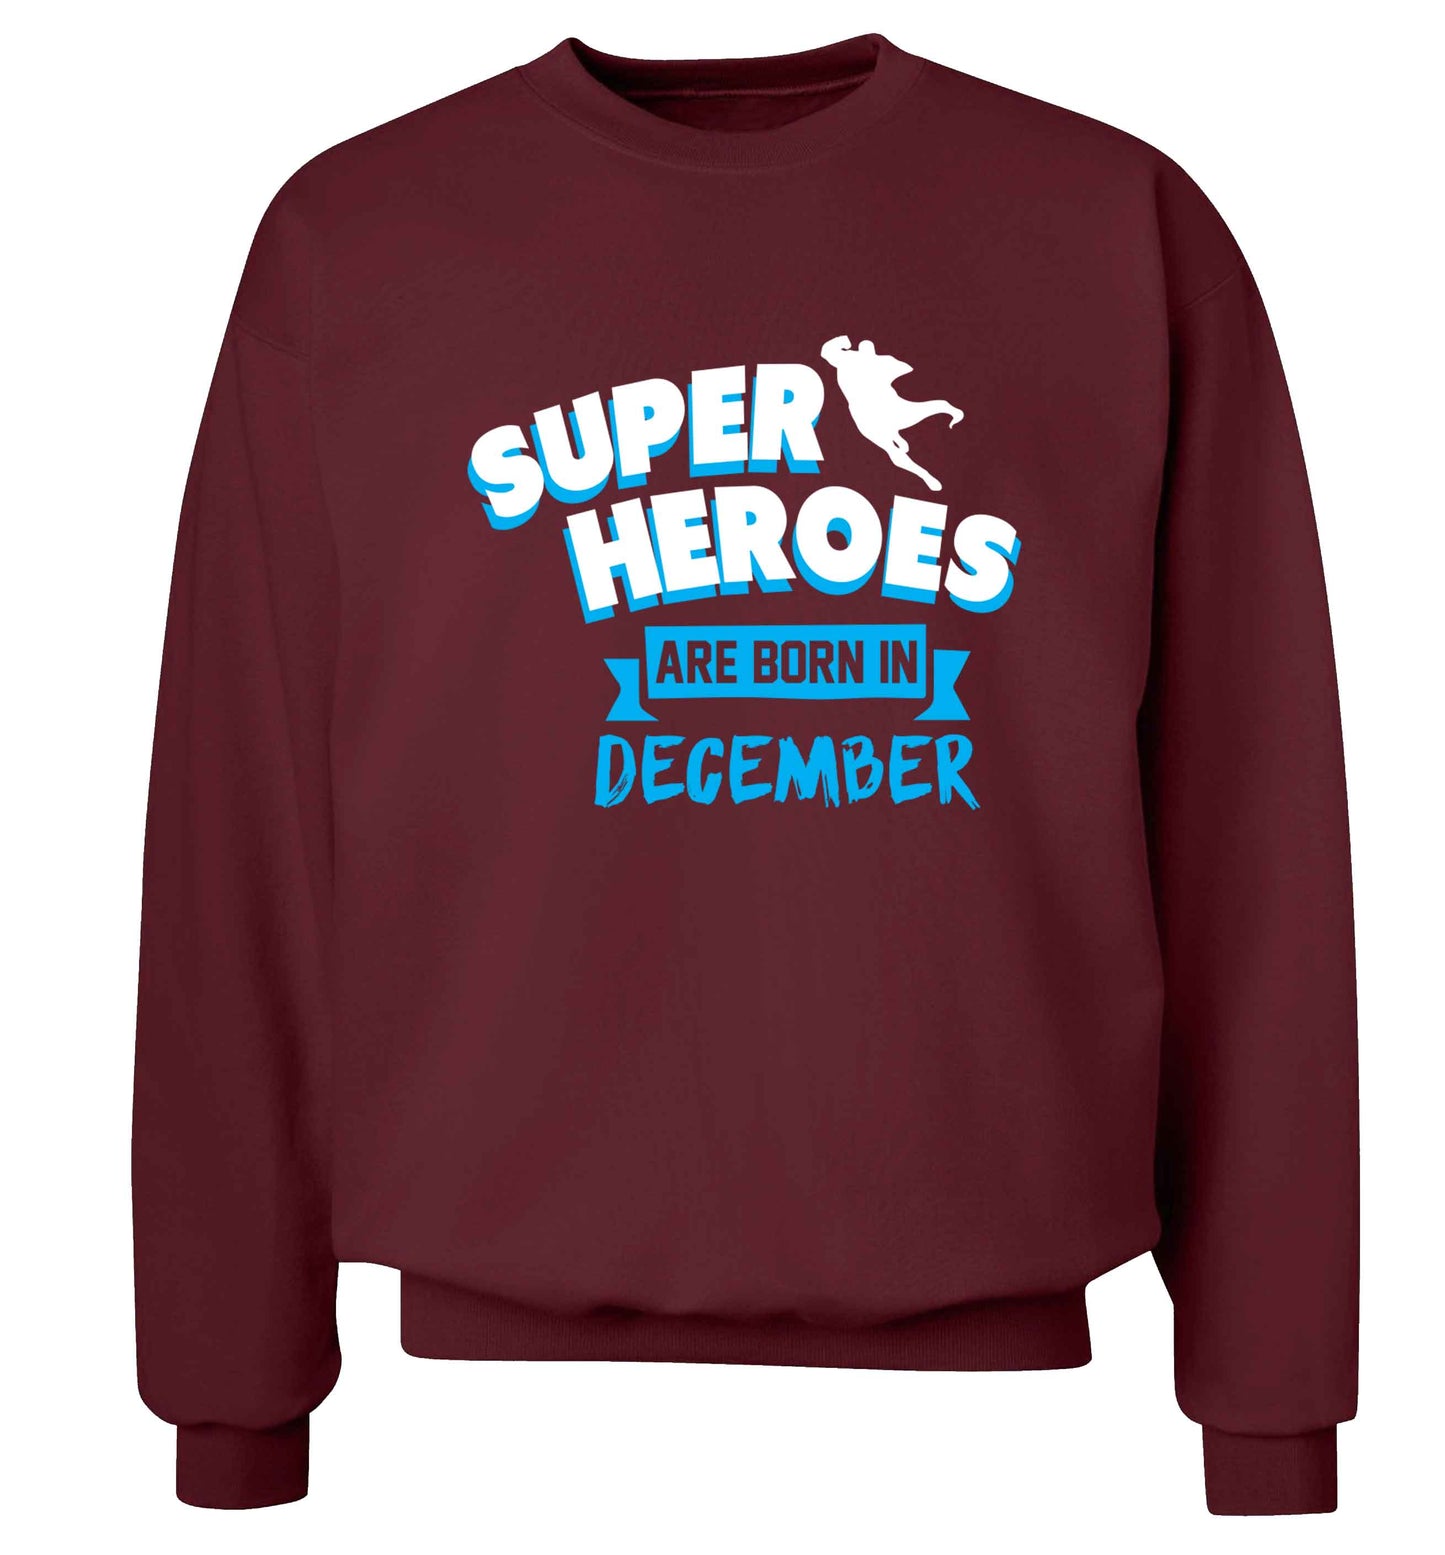 Superheroes are born in December Adult's unisex maroon Sweater 2XL